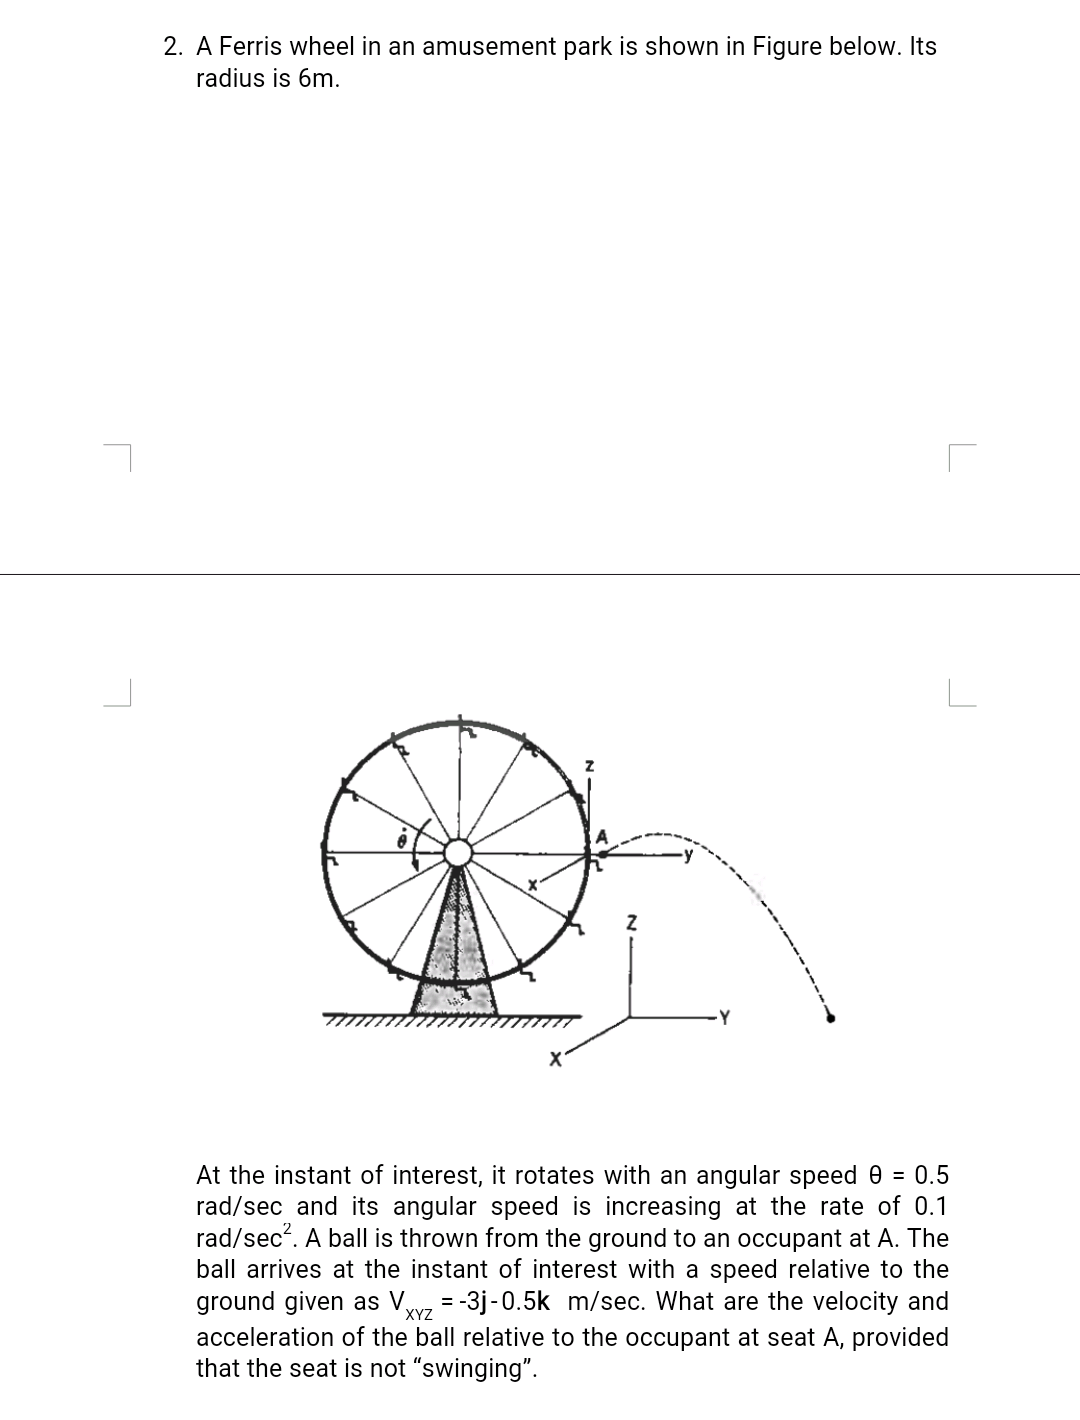 . A Ferris wheel in an amusement park is shown in Figure below. Its
radius is 6m.
At the instant of interest, it rotates with an angular speed 0 = 0.5
rad/sec and its angular speed is increasing at the rate of 0.1
rad/sec?. A ball is thrown from the ground to an occupant at A. The
ball arrives at the instant of interest with a speed relative to the
ground given as V,
acceleration of the ball relative to the occupant at seat A, provided
that the seat is not “swinging".
= -3j-0.5k m/sec. What are the velocity and
XYZ
